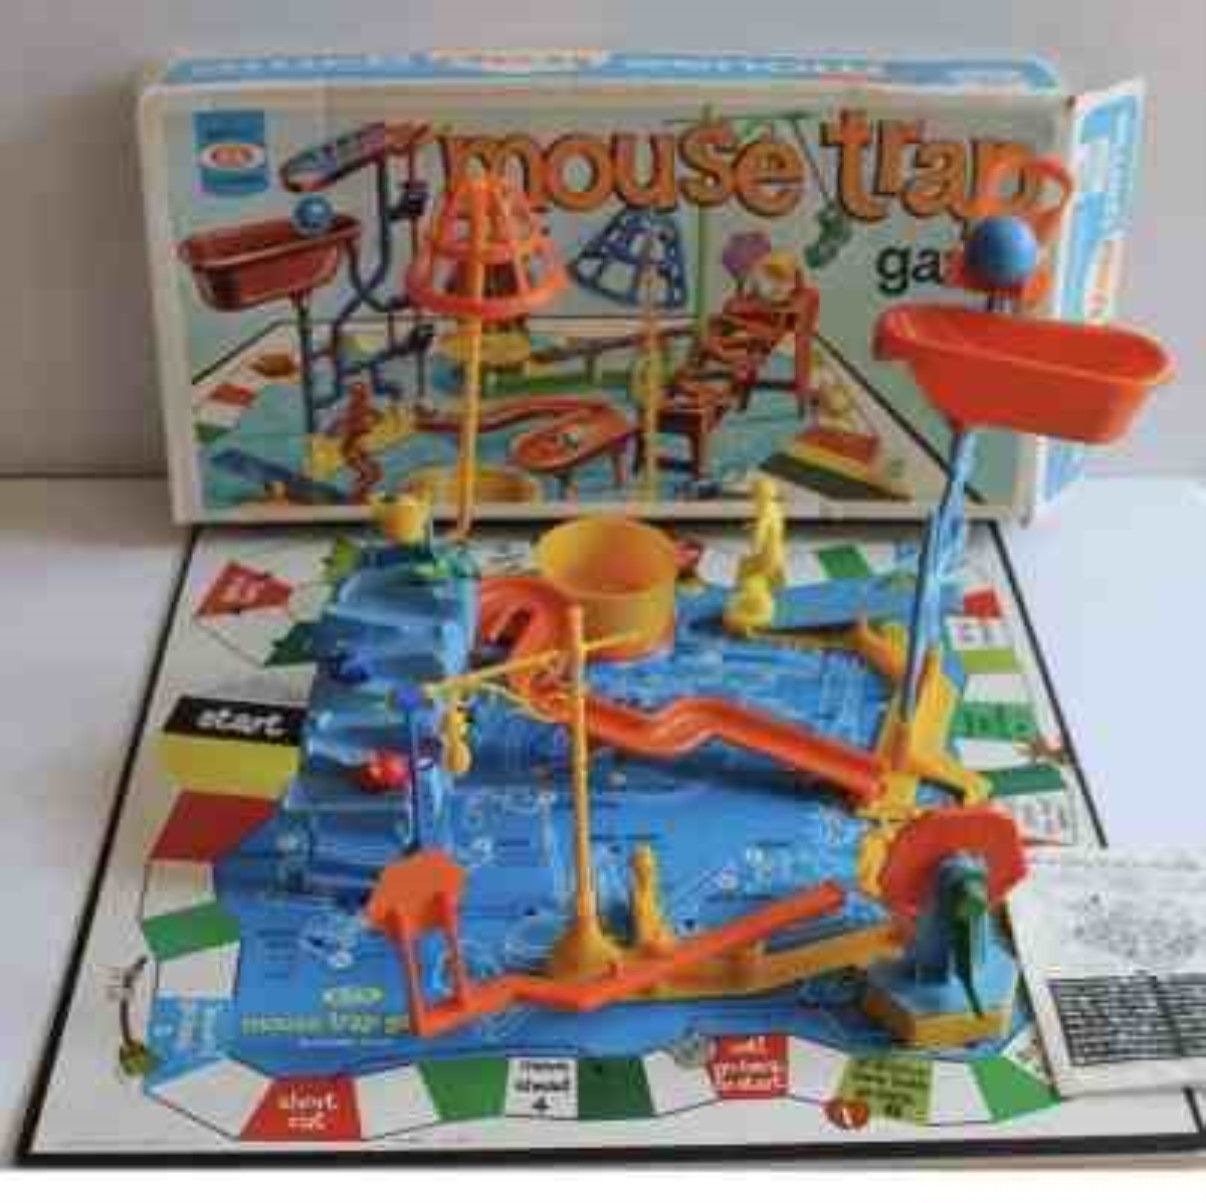 Vintage Mouse Trap Board Game by Ideal 1975 In Box